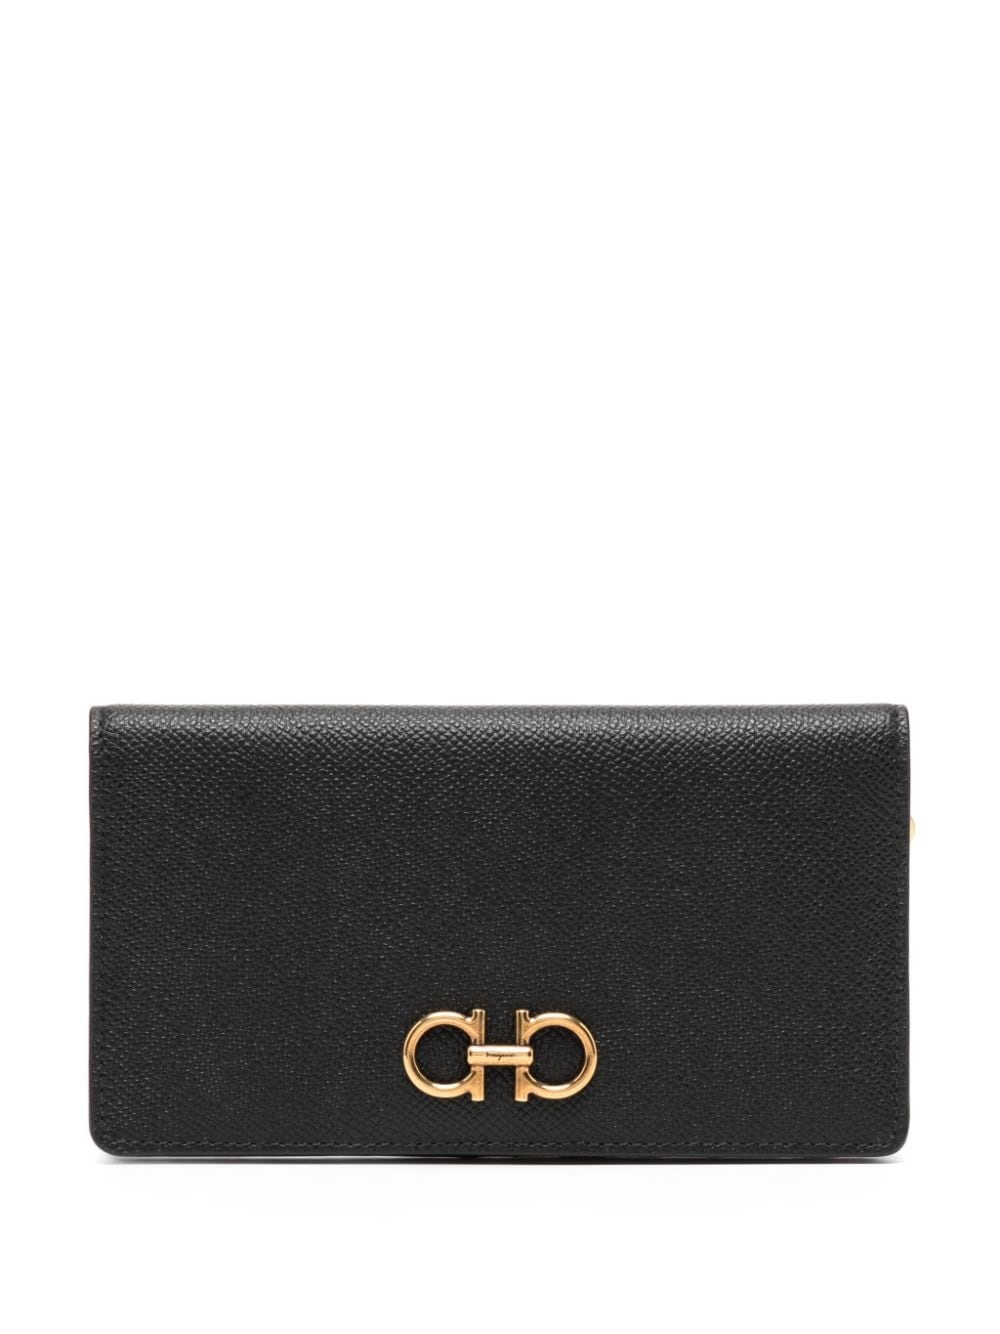 Gancini continental leather wallet - 1